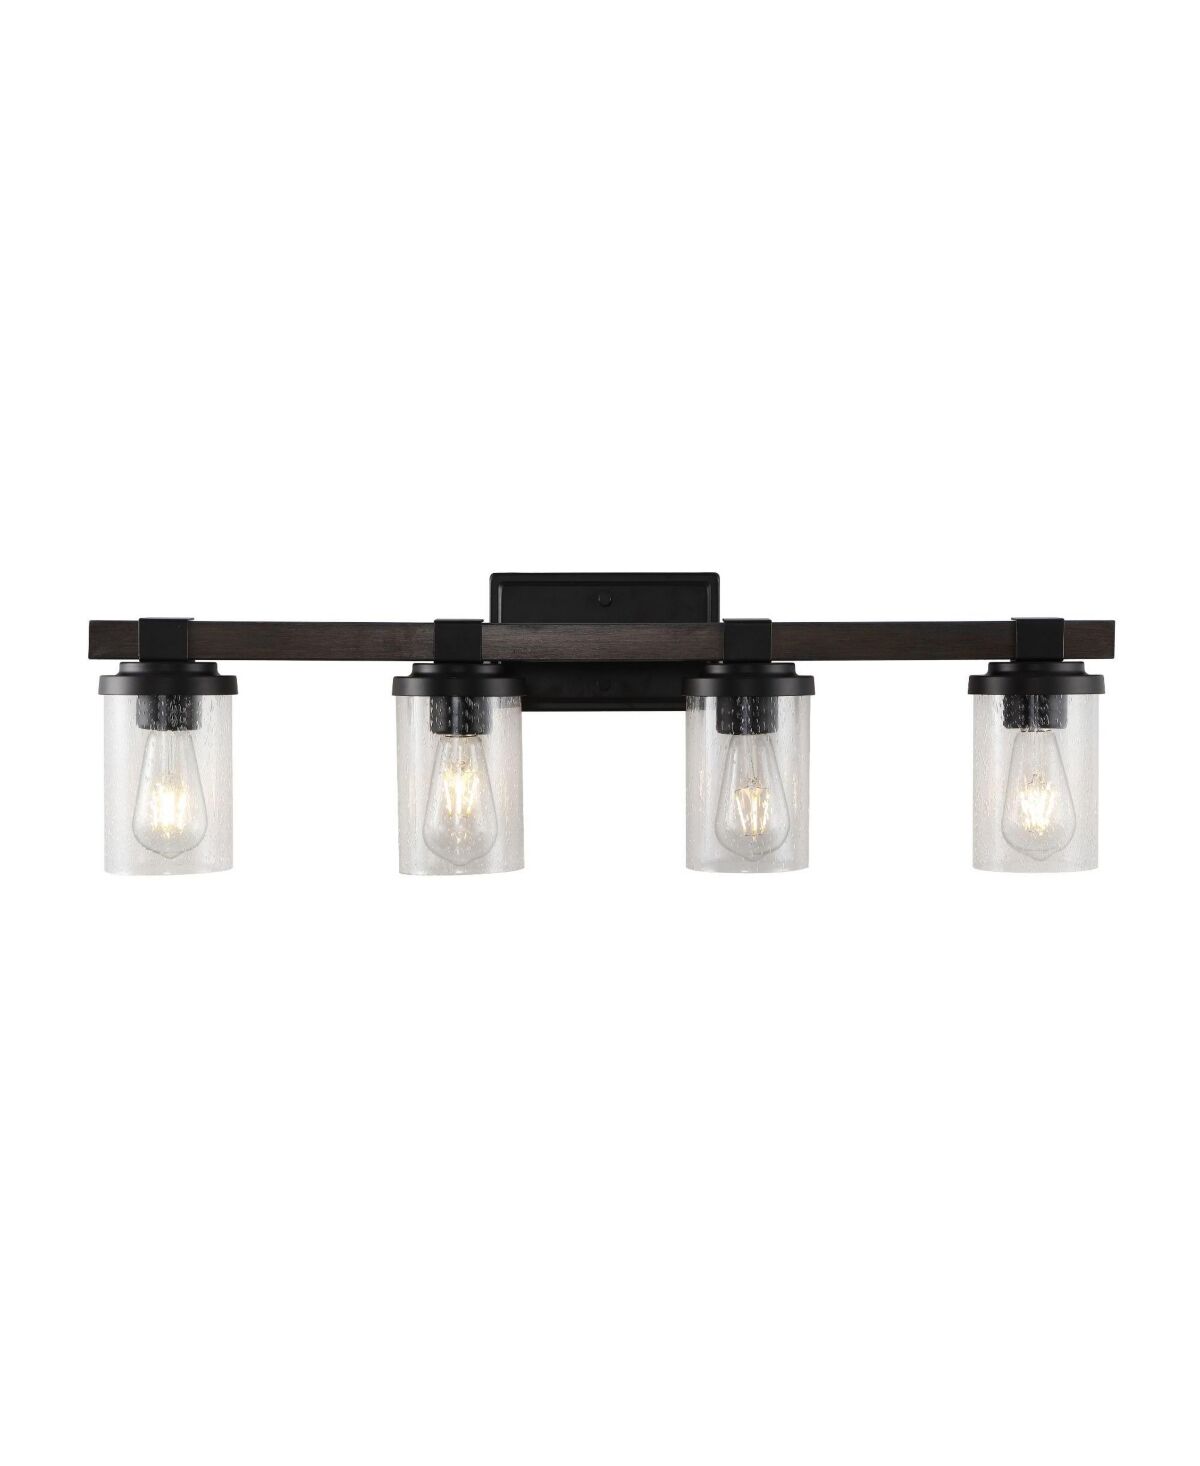 Jonathan Y Bungalow Iron/Seeded Glass Rustic Farmhouse Led Vanity Light - Oil rubbed bronze